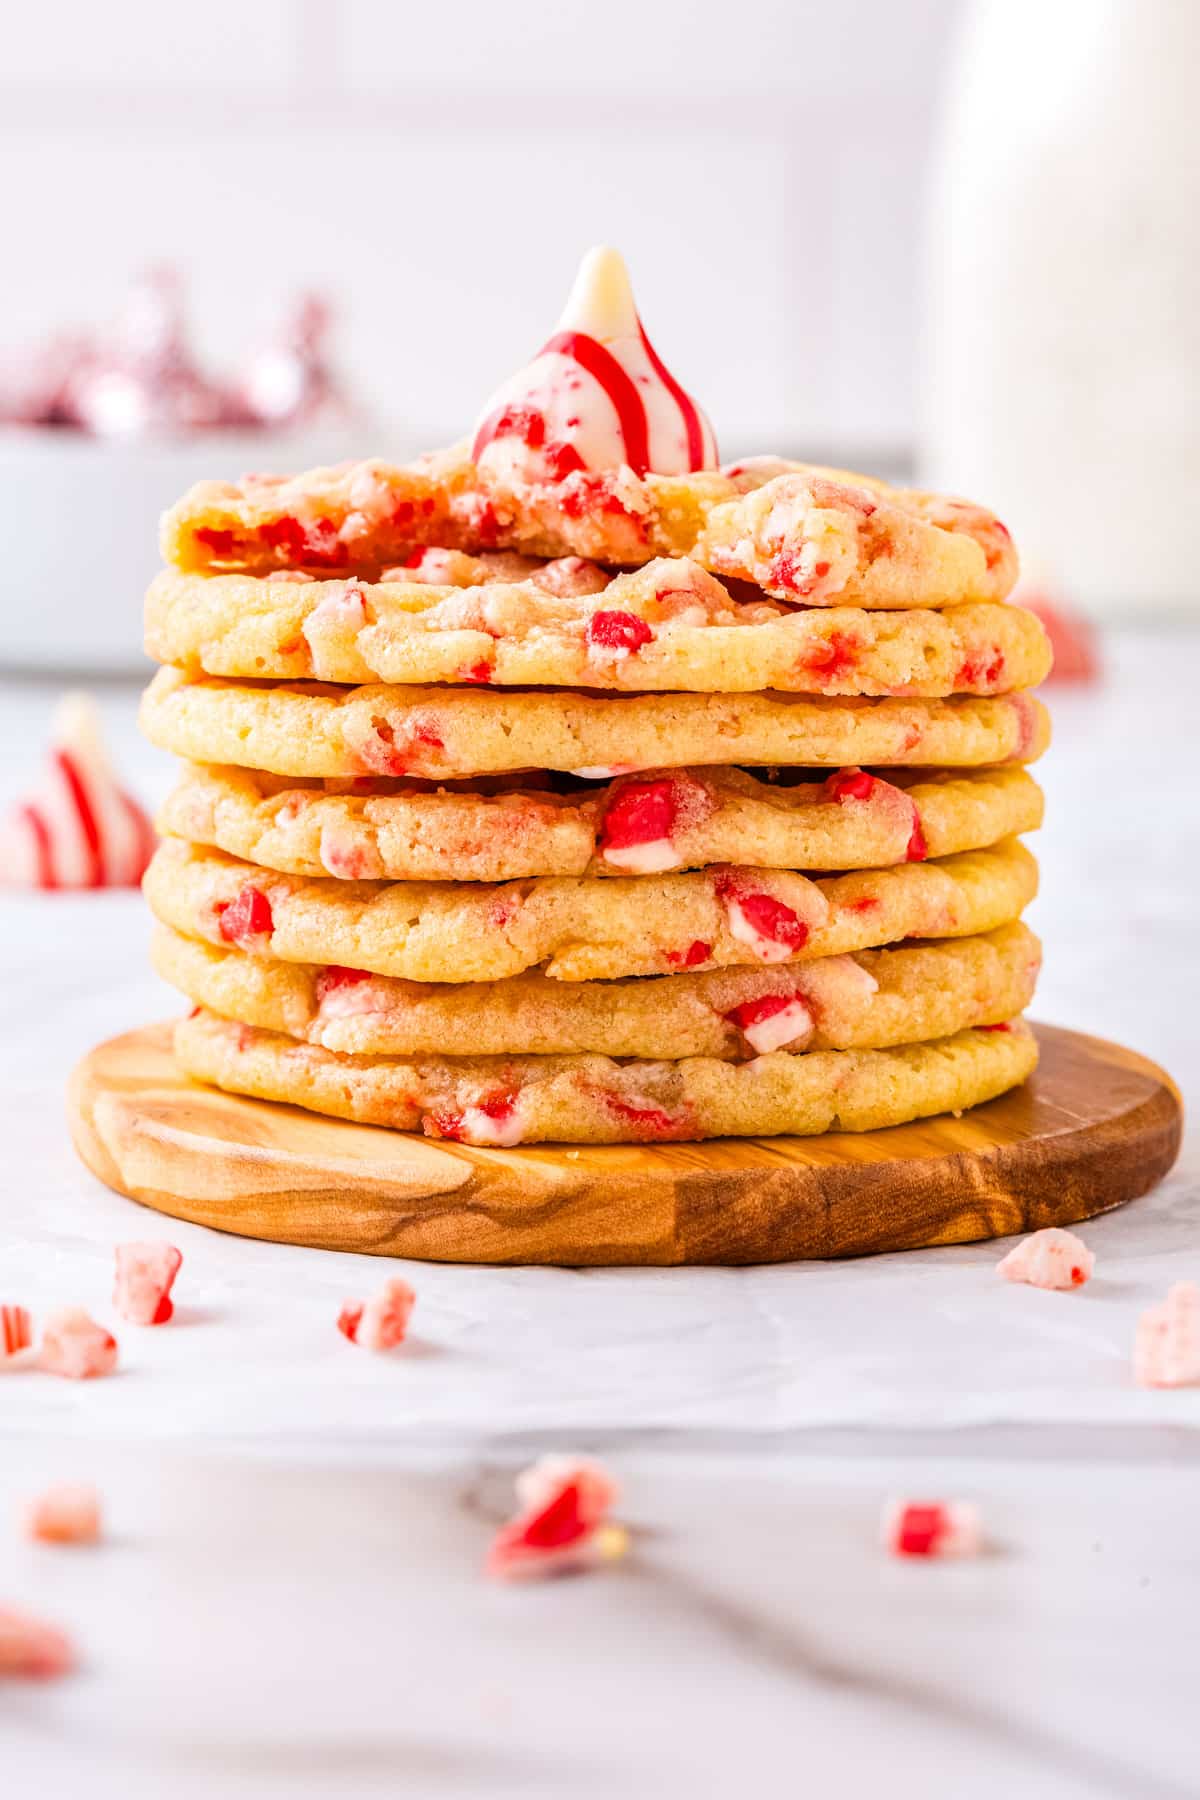 Seven Peppermint Cookies stacked on each other.